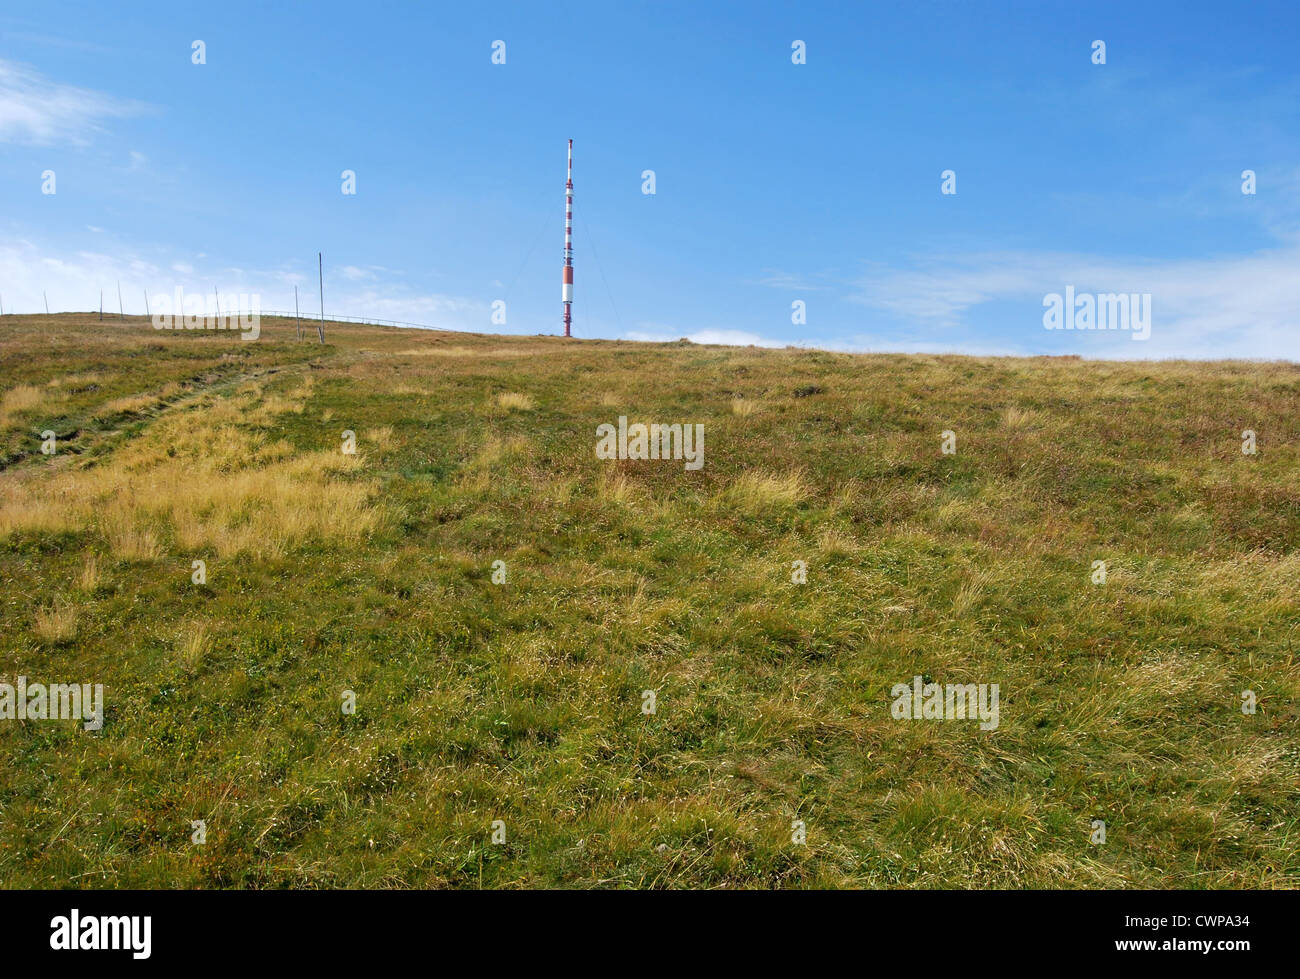 Kralova hola hill in easternmost part of Nizke Tatry mountains in Slovakia with mountain meadow and communication tower Stock Photo